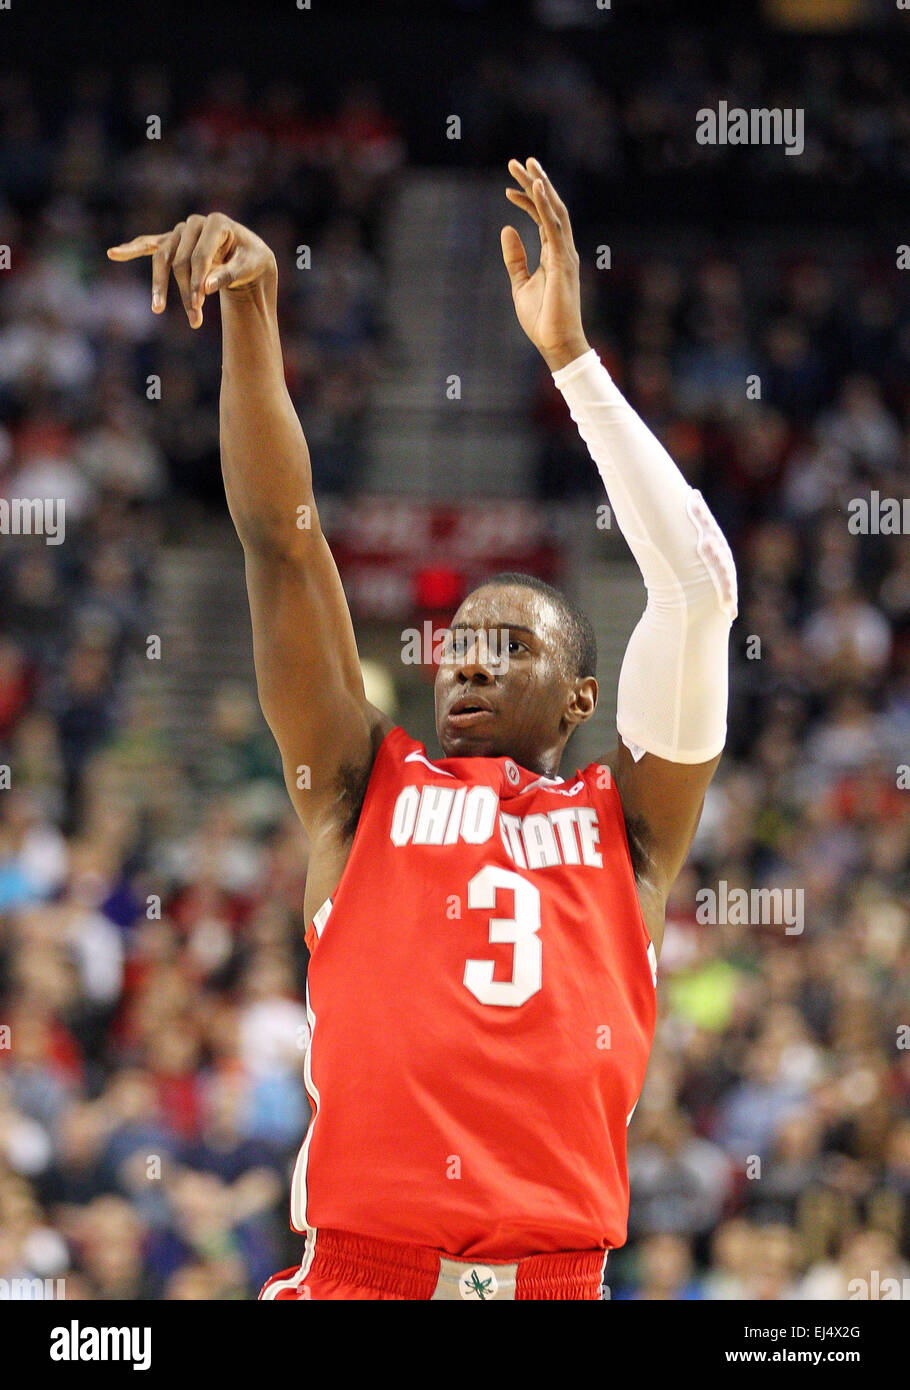 March 19, 2015: Ohio State Buckeyes guard Shannon Scott (3) takes a free throw during the 2nd round of the 2015 NCAA Men's Basketball Championships between the Buckeyes and the Virginia Commonwealth University Rams at the Moda Center, Portland OR Stock Photo